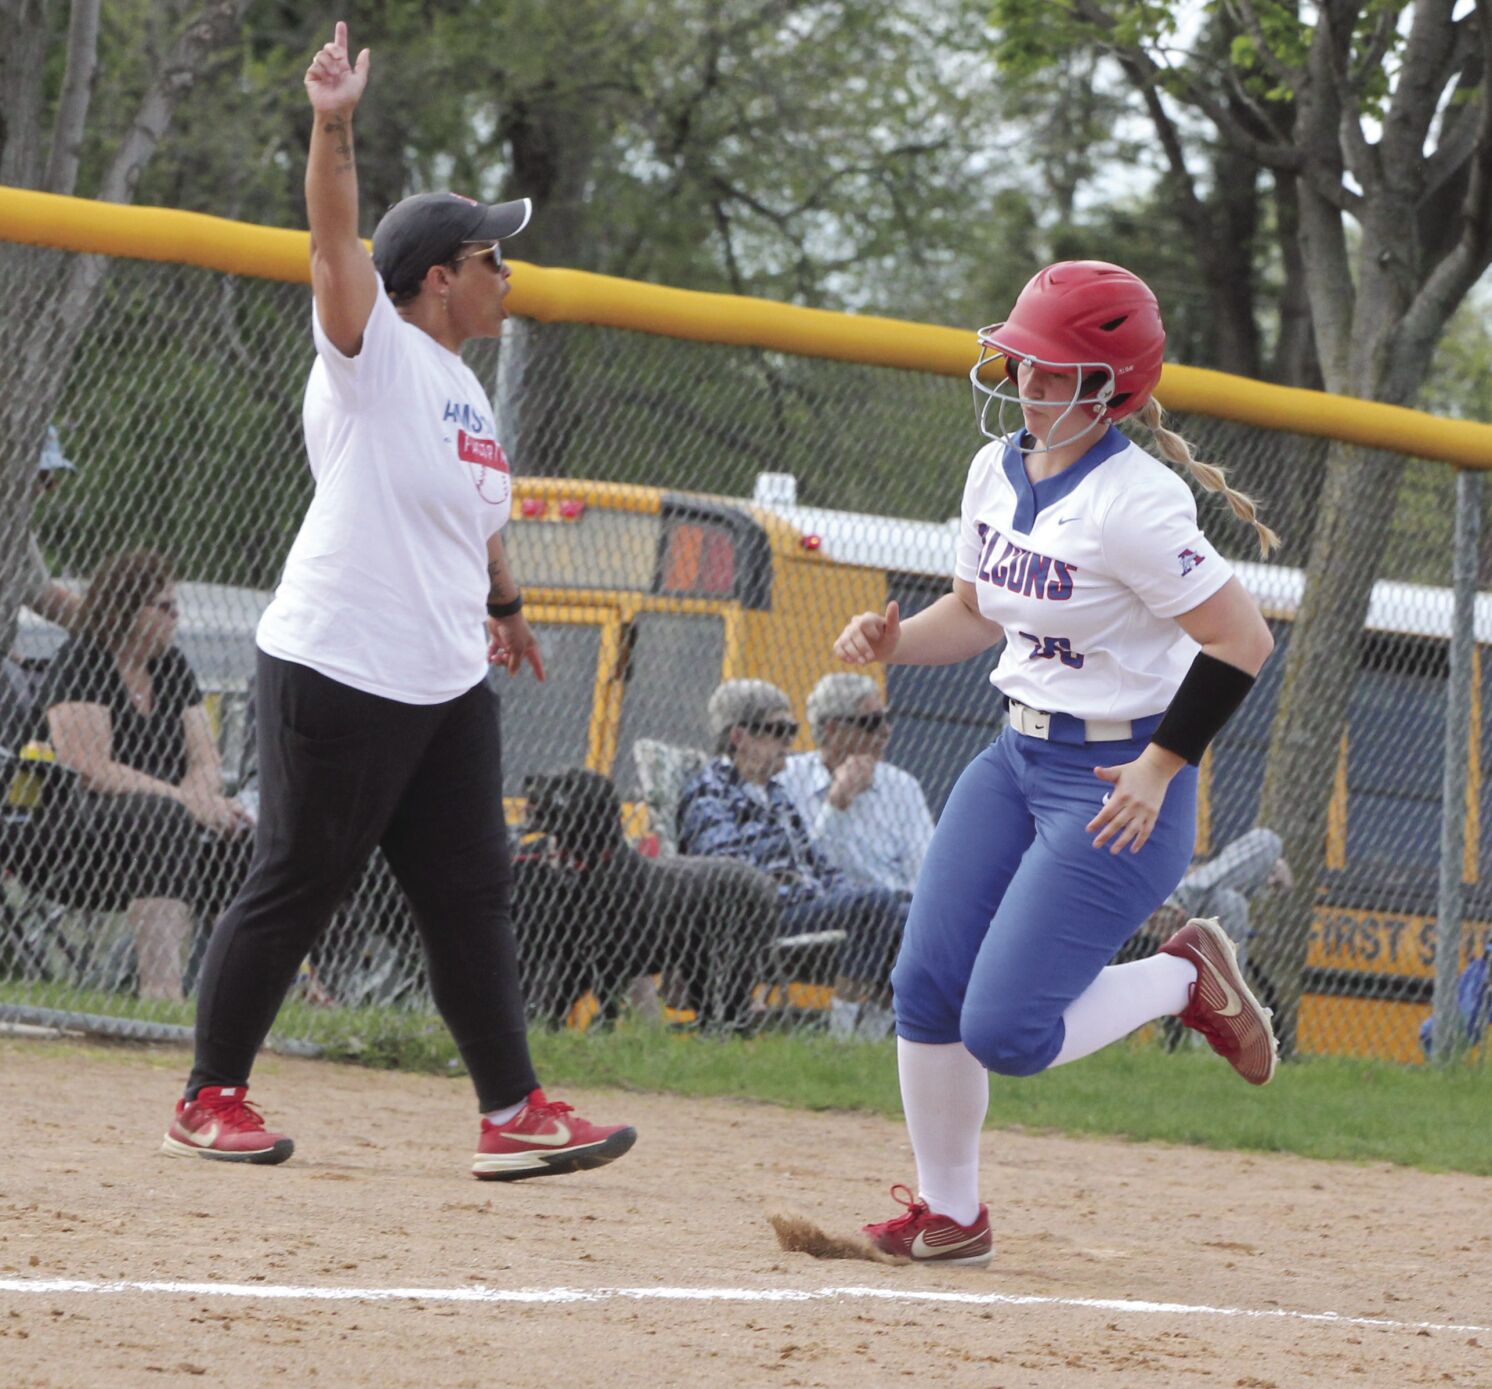 Falcons softball earns two wins after falling to Trojans